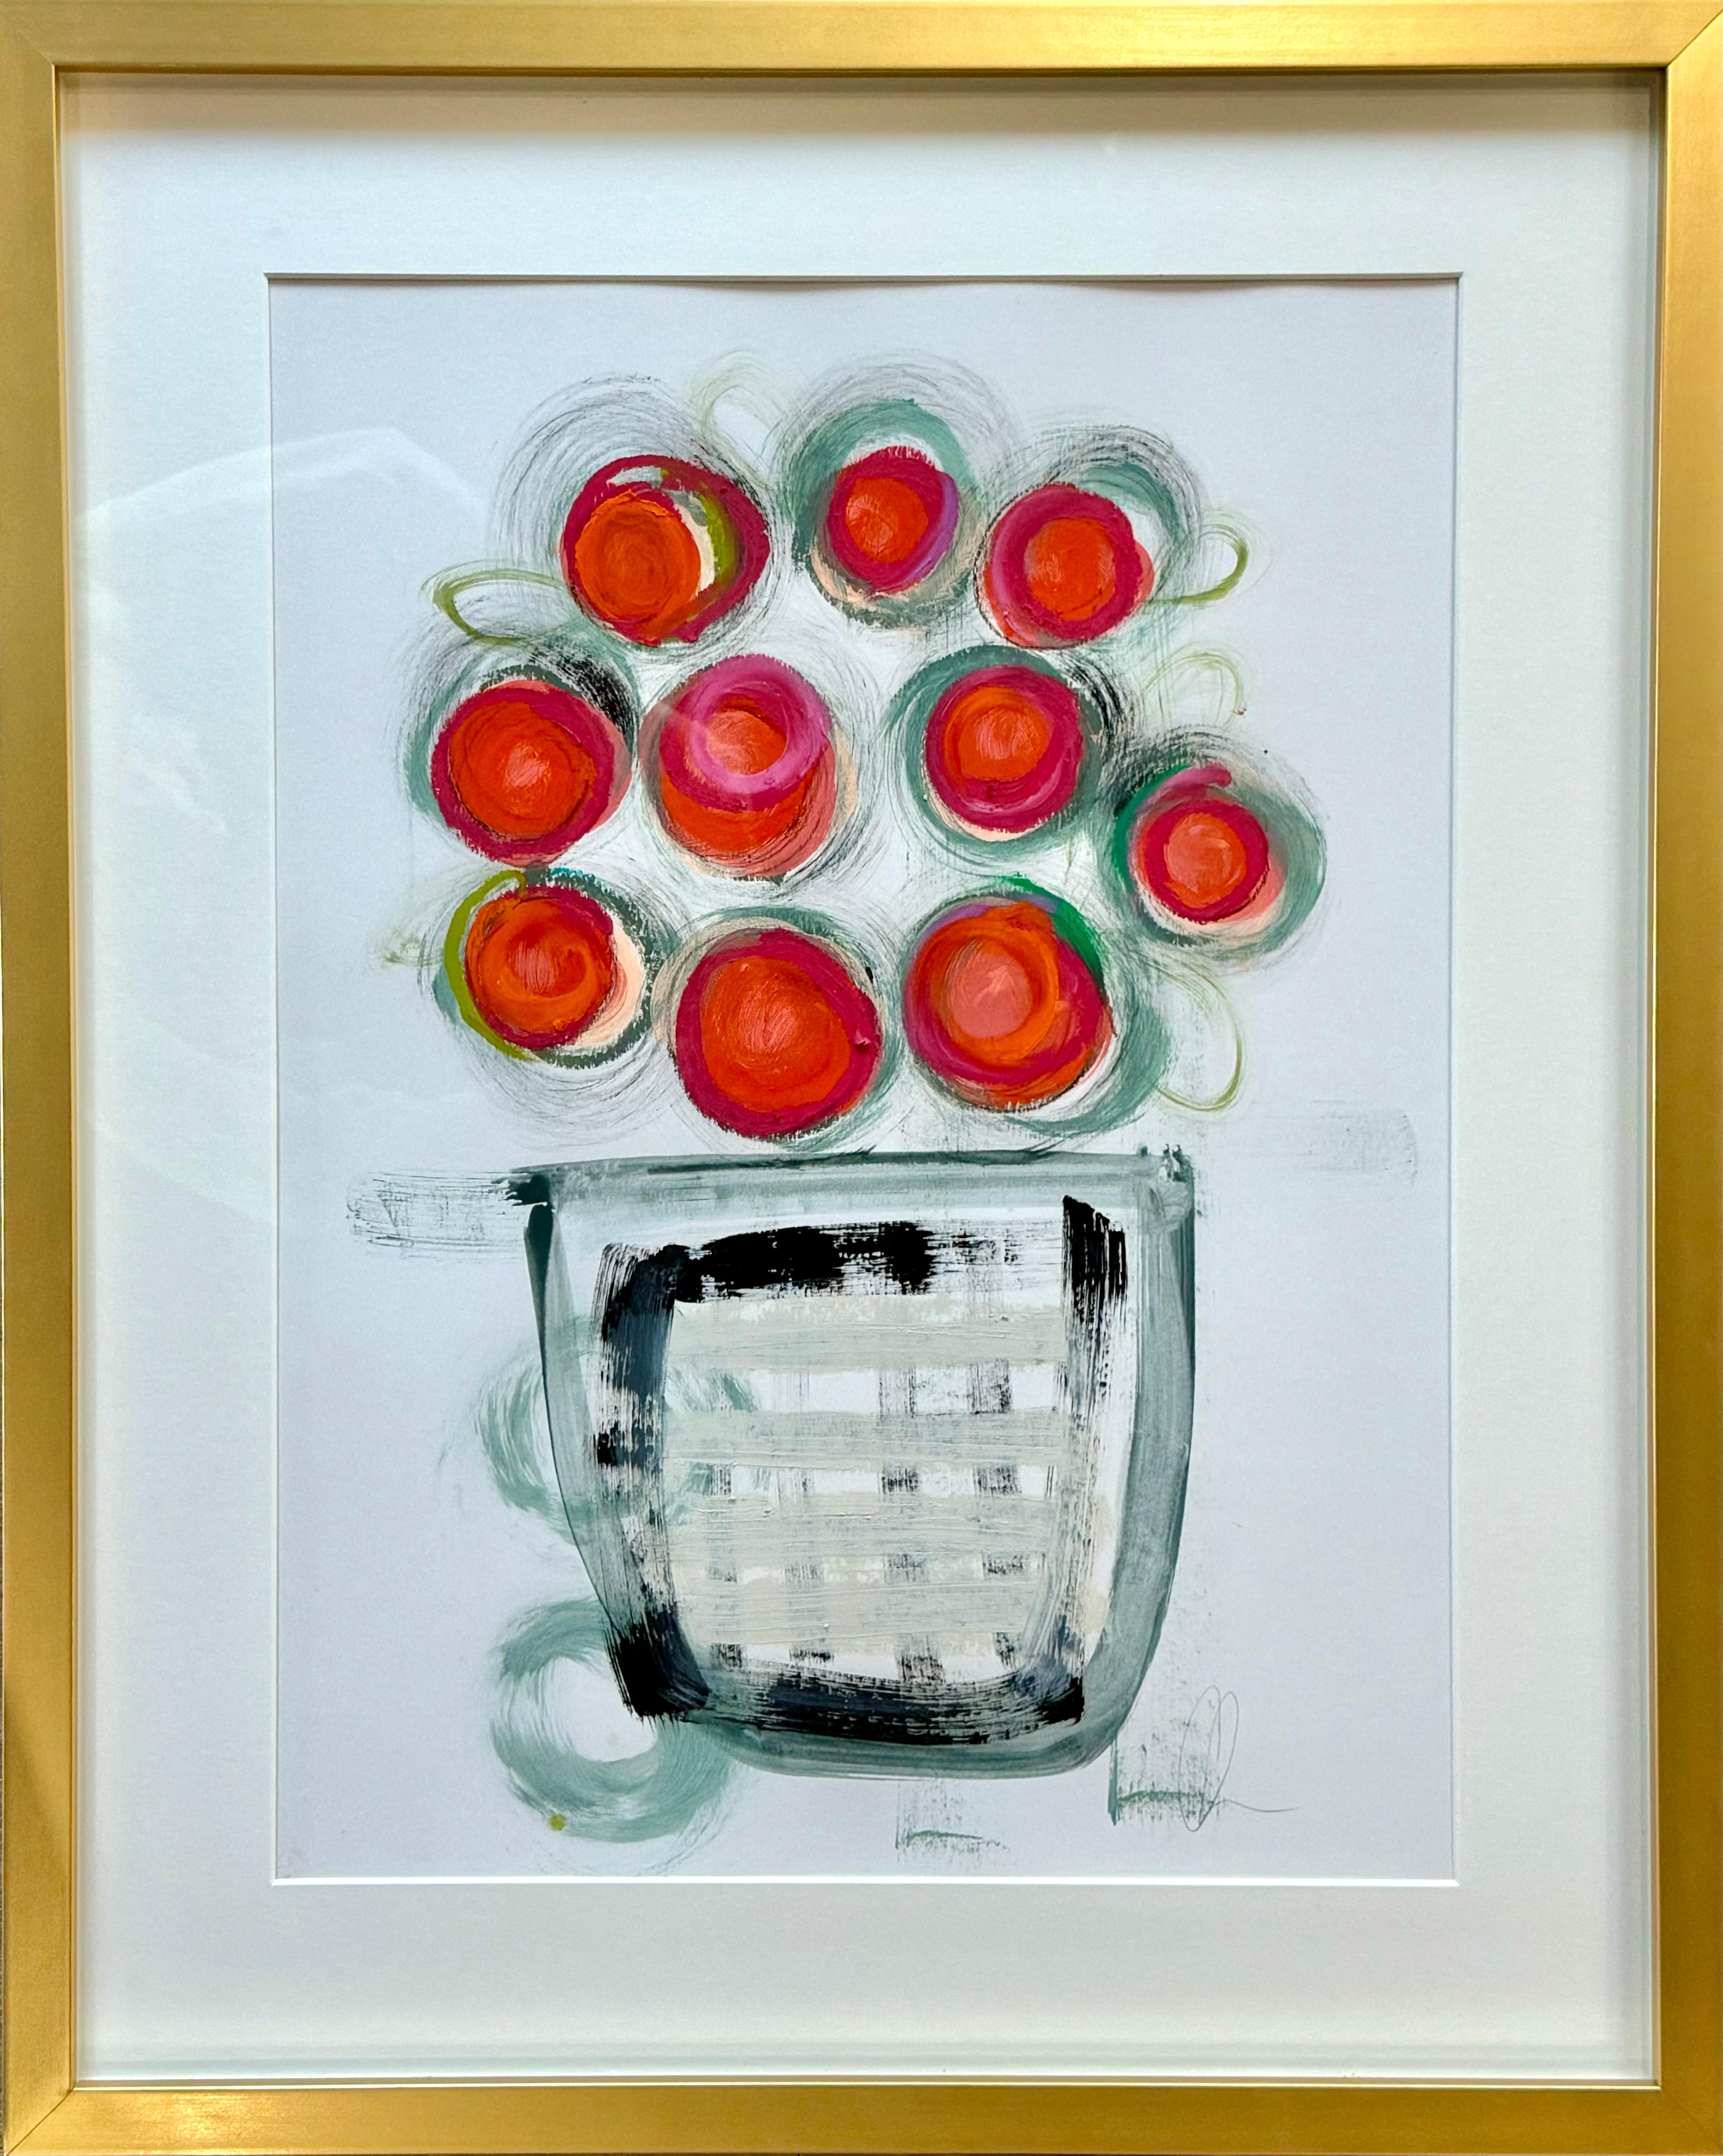 The size includes the frame.

Colleen Leach is a self taught artist.  She believes that art evokes the human spirit. Heavily influenced by music, Colleen's work explores the relationship of playful bold linear works, texture and the use of color